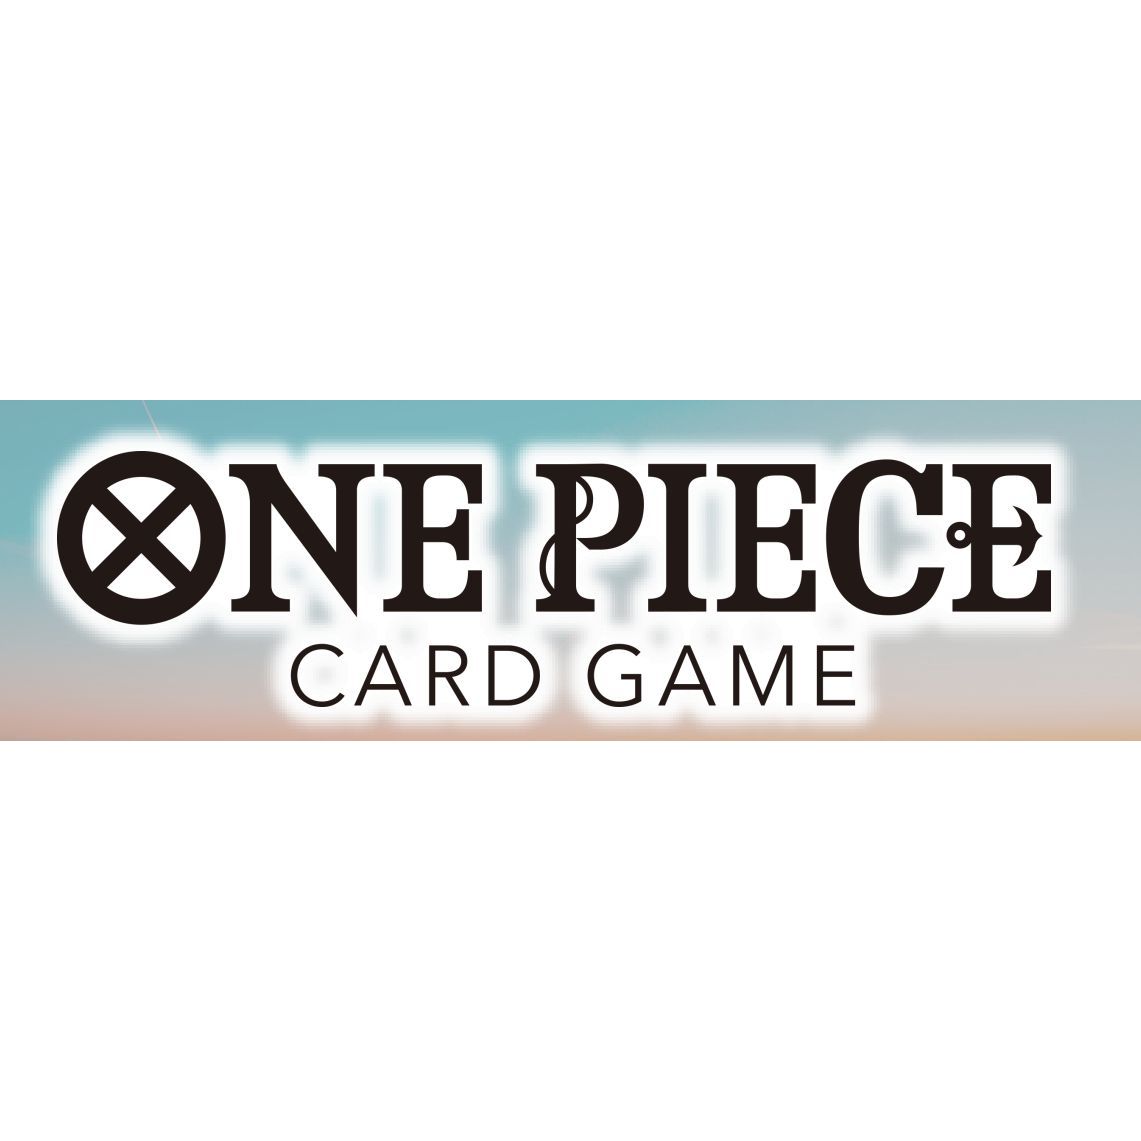 One Piece Card Game - Pillars of Strength OP-03 Booster Box Sealed Case (12 Boxes) - English